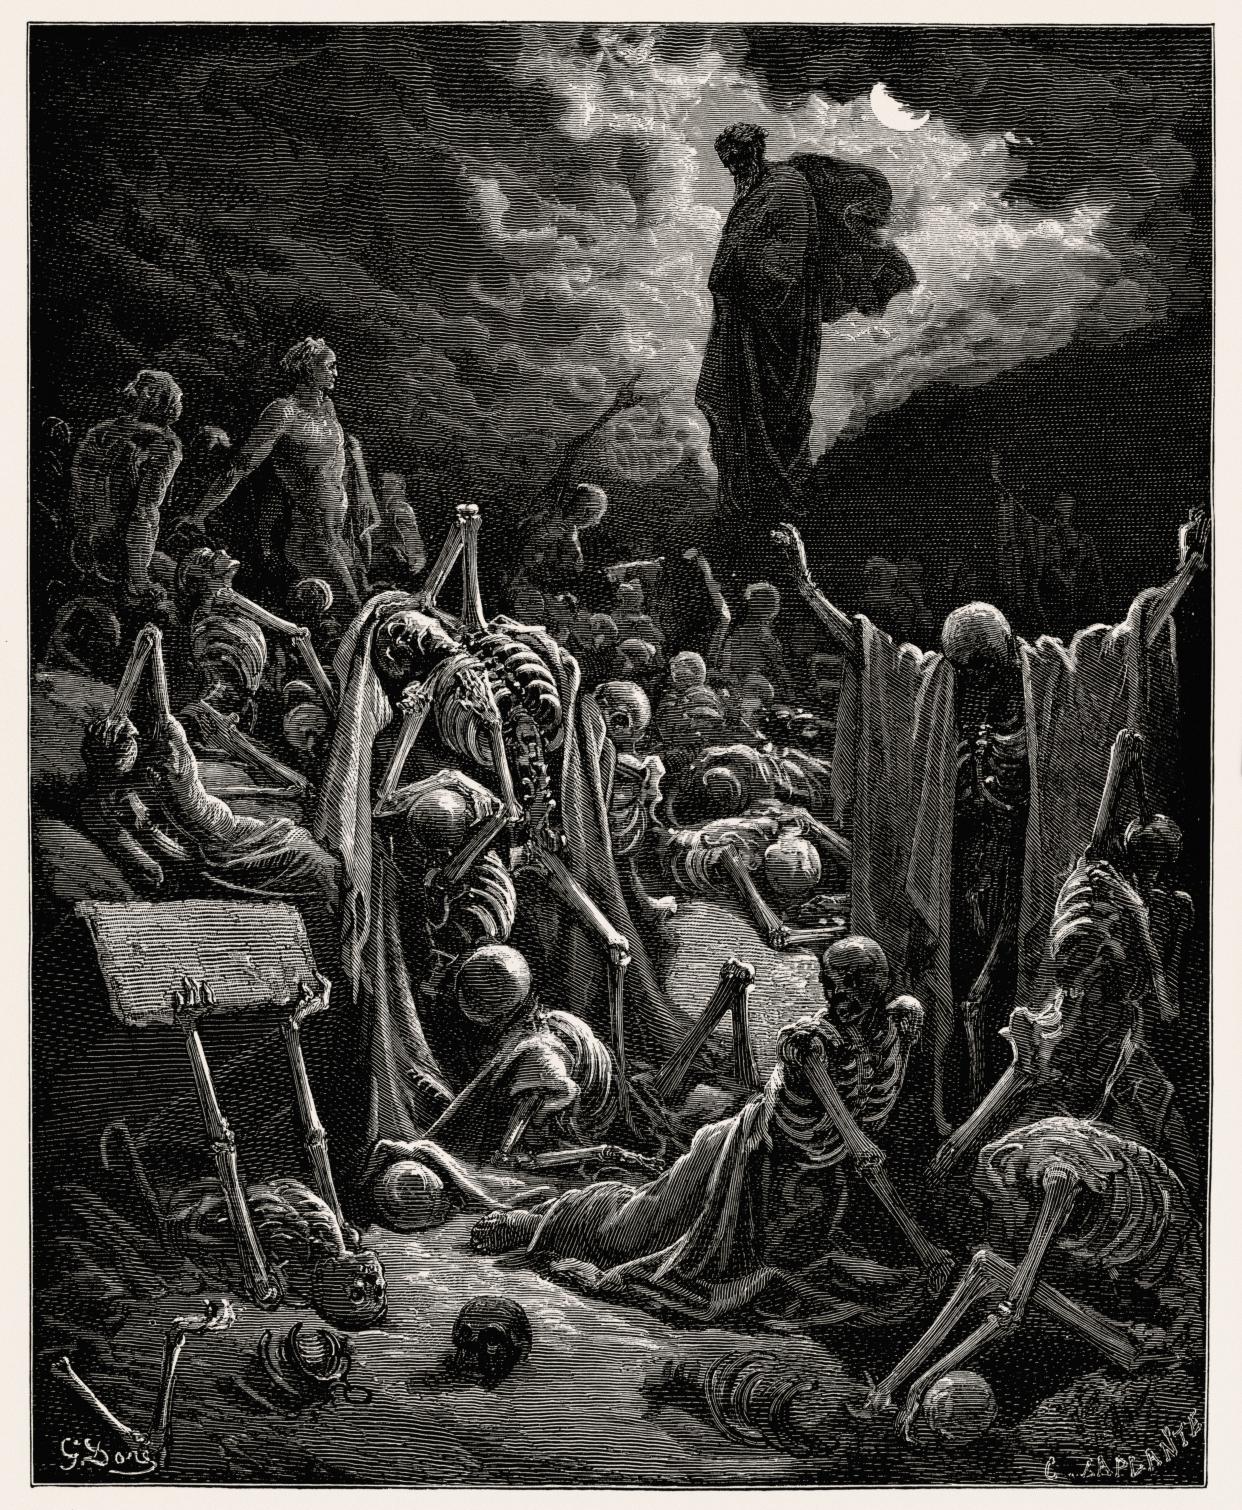 Engraving of “The Vision of The Valley of The Dry Bones,” from the book of Ezekiel, by Gustave Doré (1832-1883).